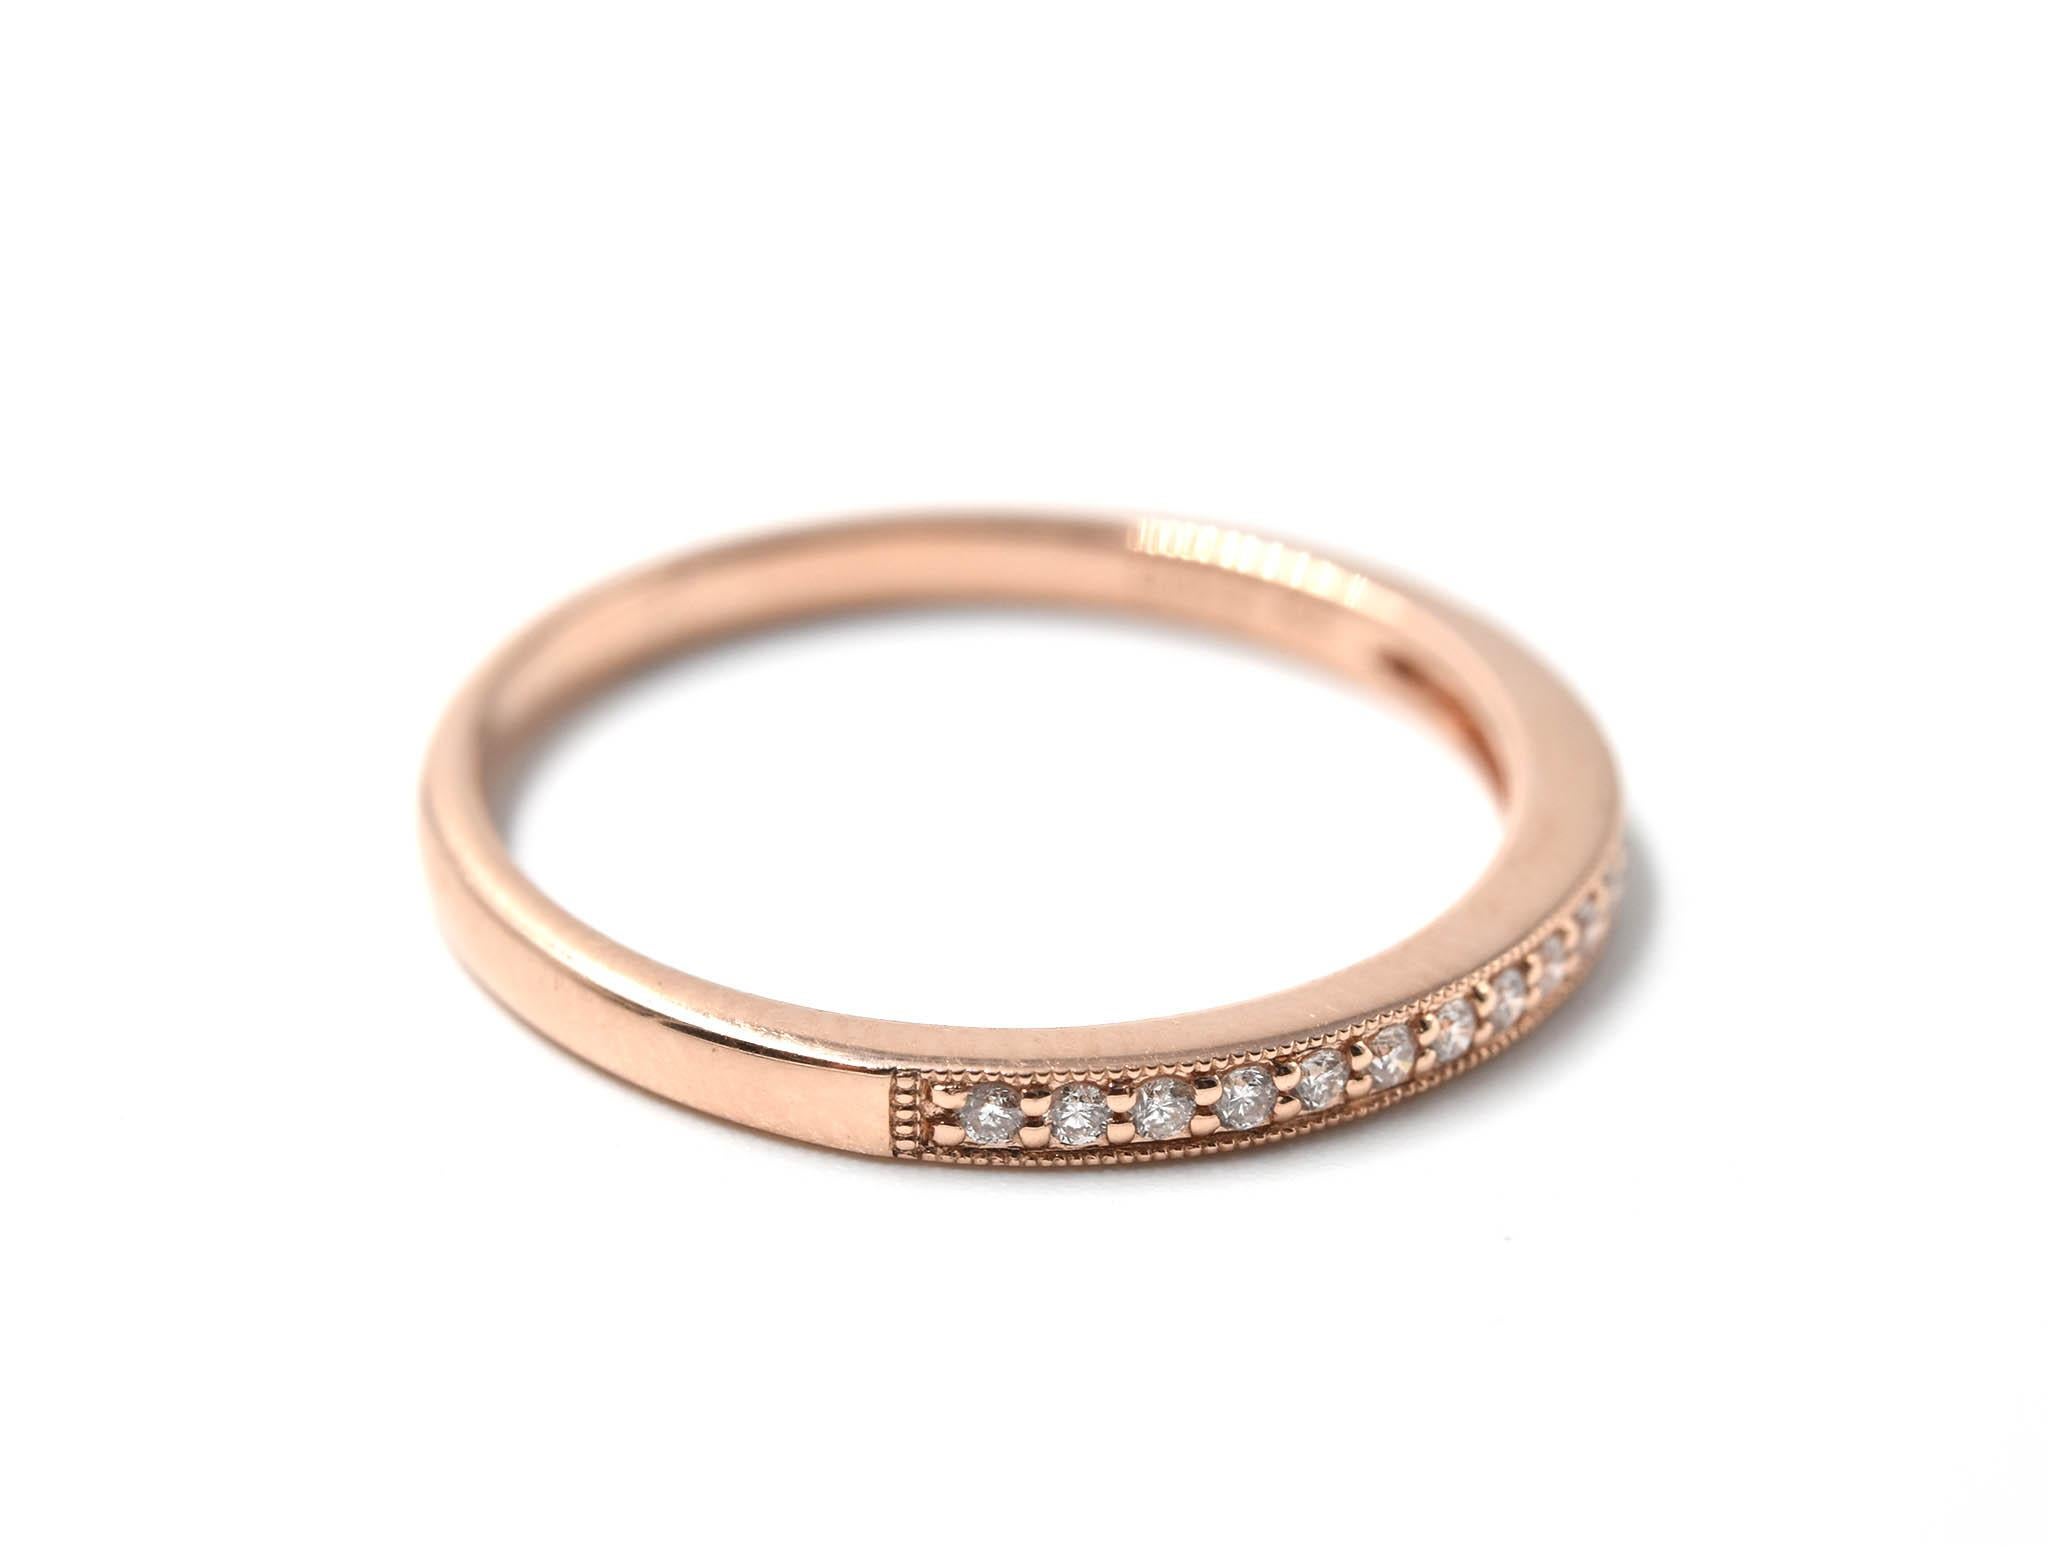 Designer: custom design
Material: 14k rose gold
Diamonds: 18 round brilliant cut diamonds = 0.12 carat total weight
Dimensions: band is 2.00mm wide
Ring size: 7 1/2 (please allow two additional shipping days for sizing requests)
Weight: 1.20 grams
